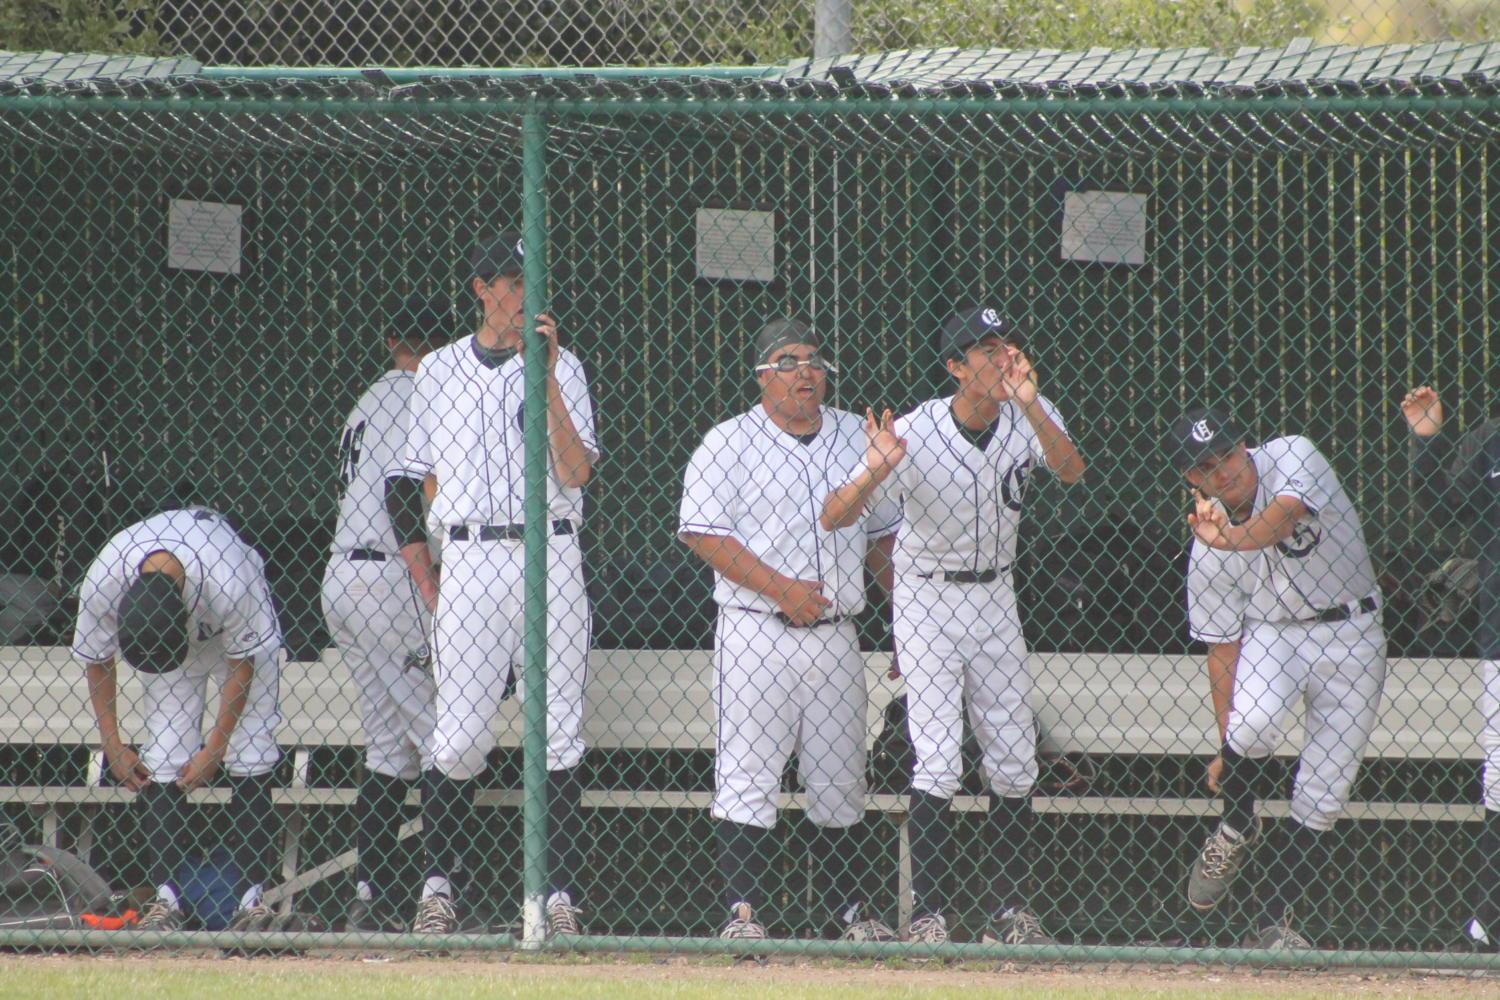 Carlmont players illustrate their spirit by swimming in the dome. In the dugout, the players cheer and encourage each other throughout the whole match.